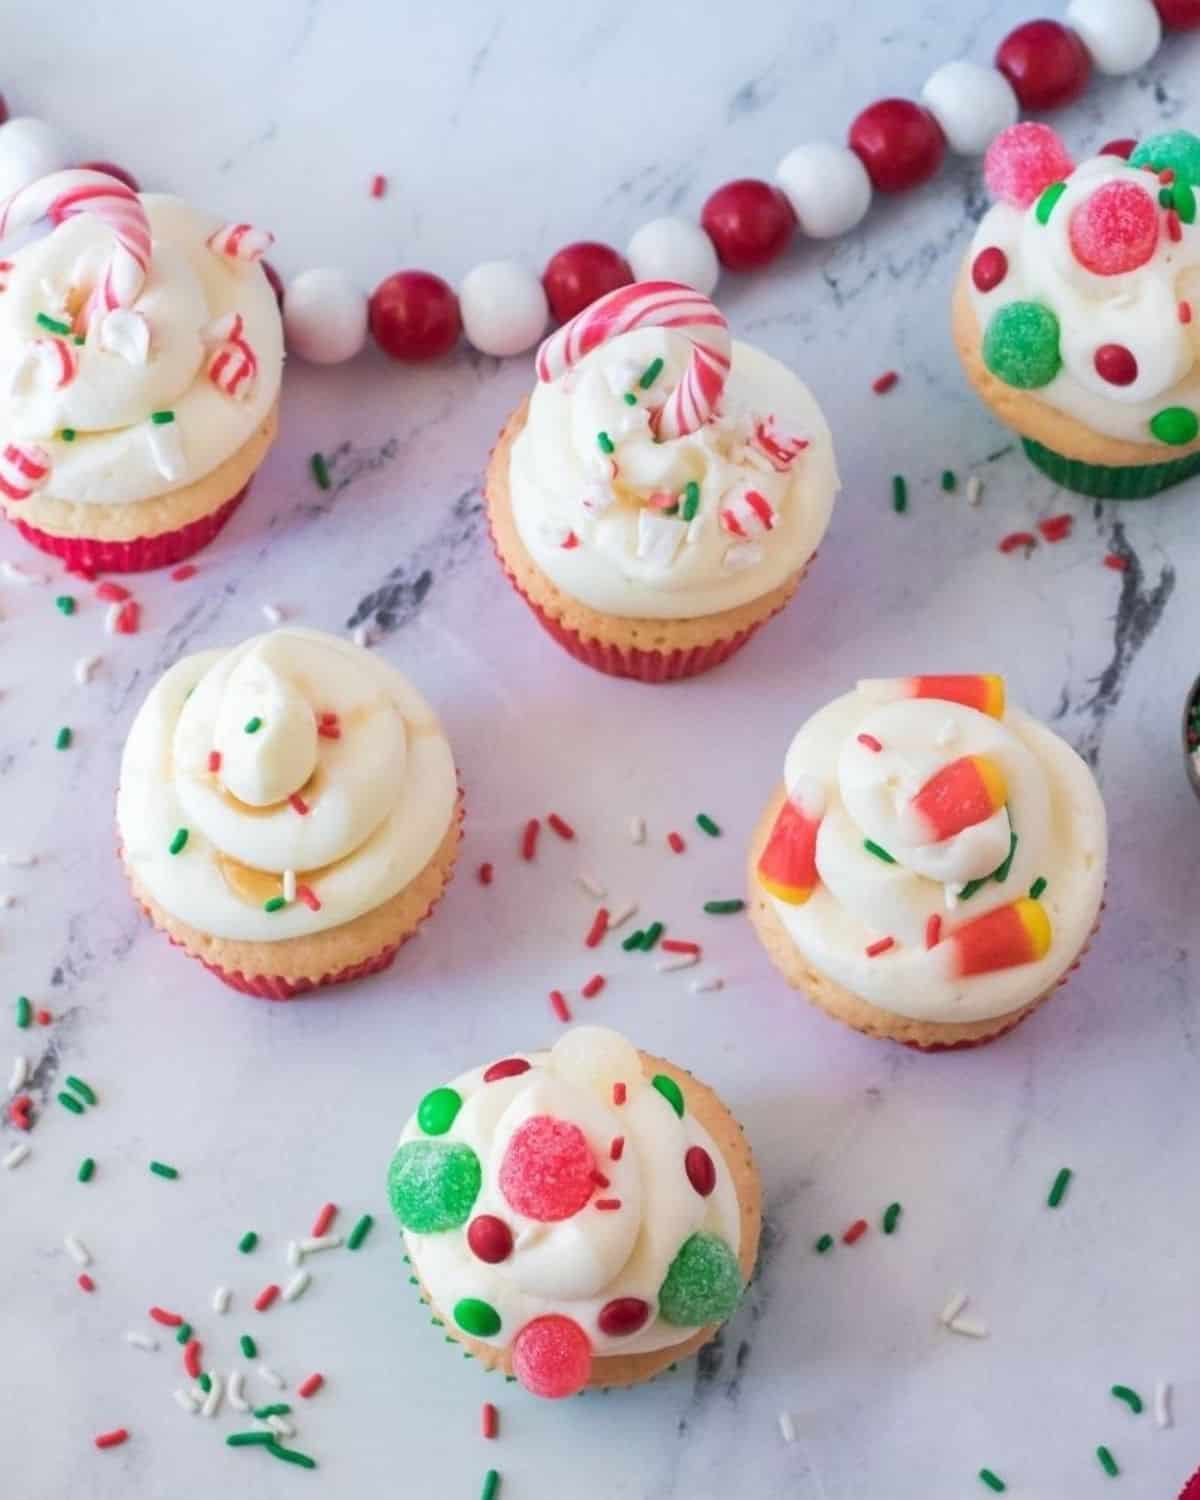 An overhead view of buddy the elf cupcakes with gumdrops, sprinkles, and candy corn. 